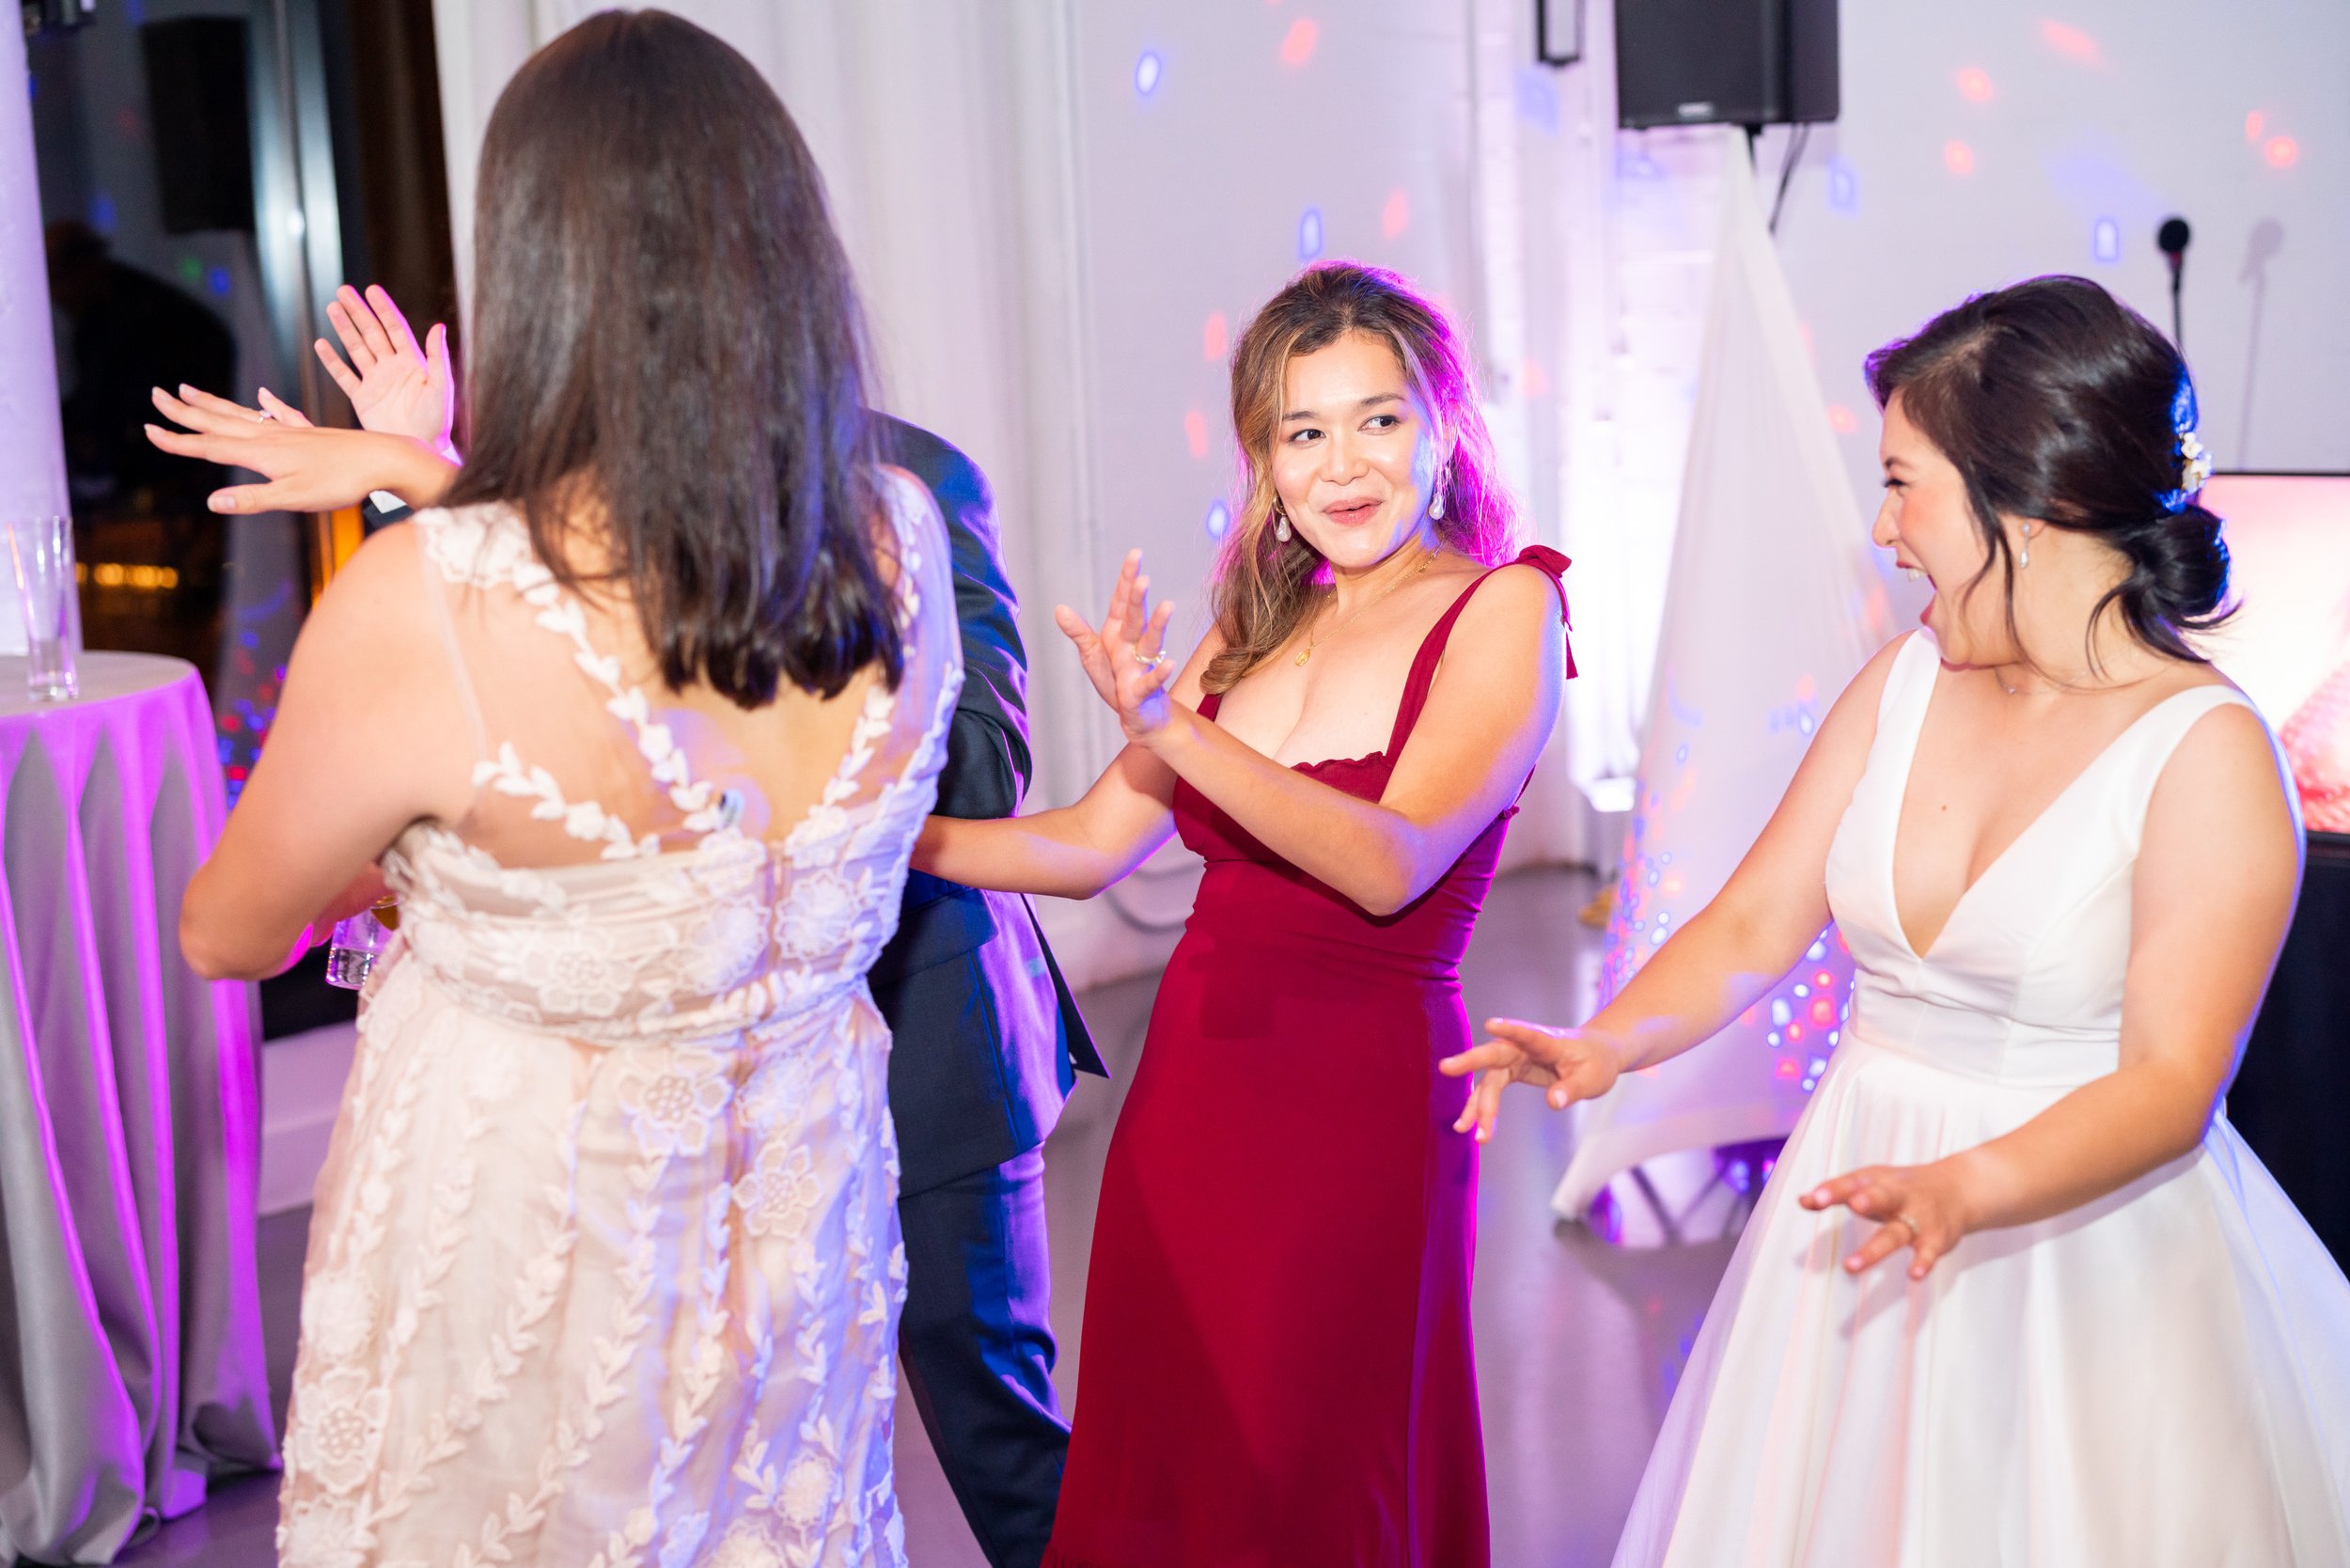 Bride dances with guests on colorful dance floor with purple uplighting 